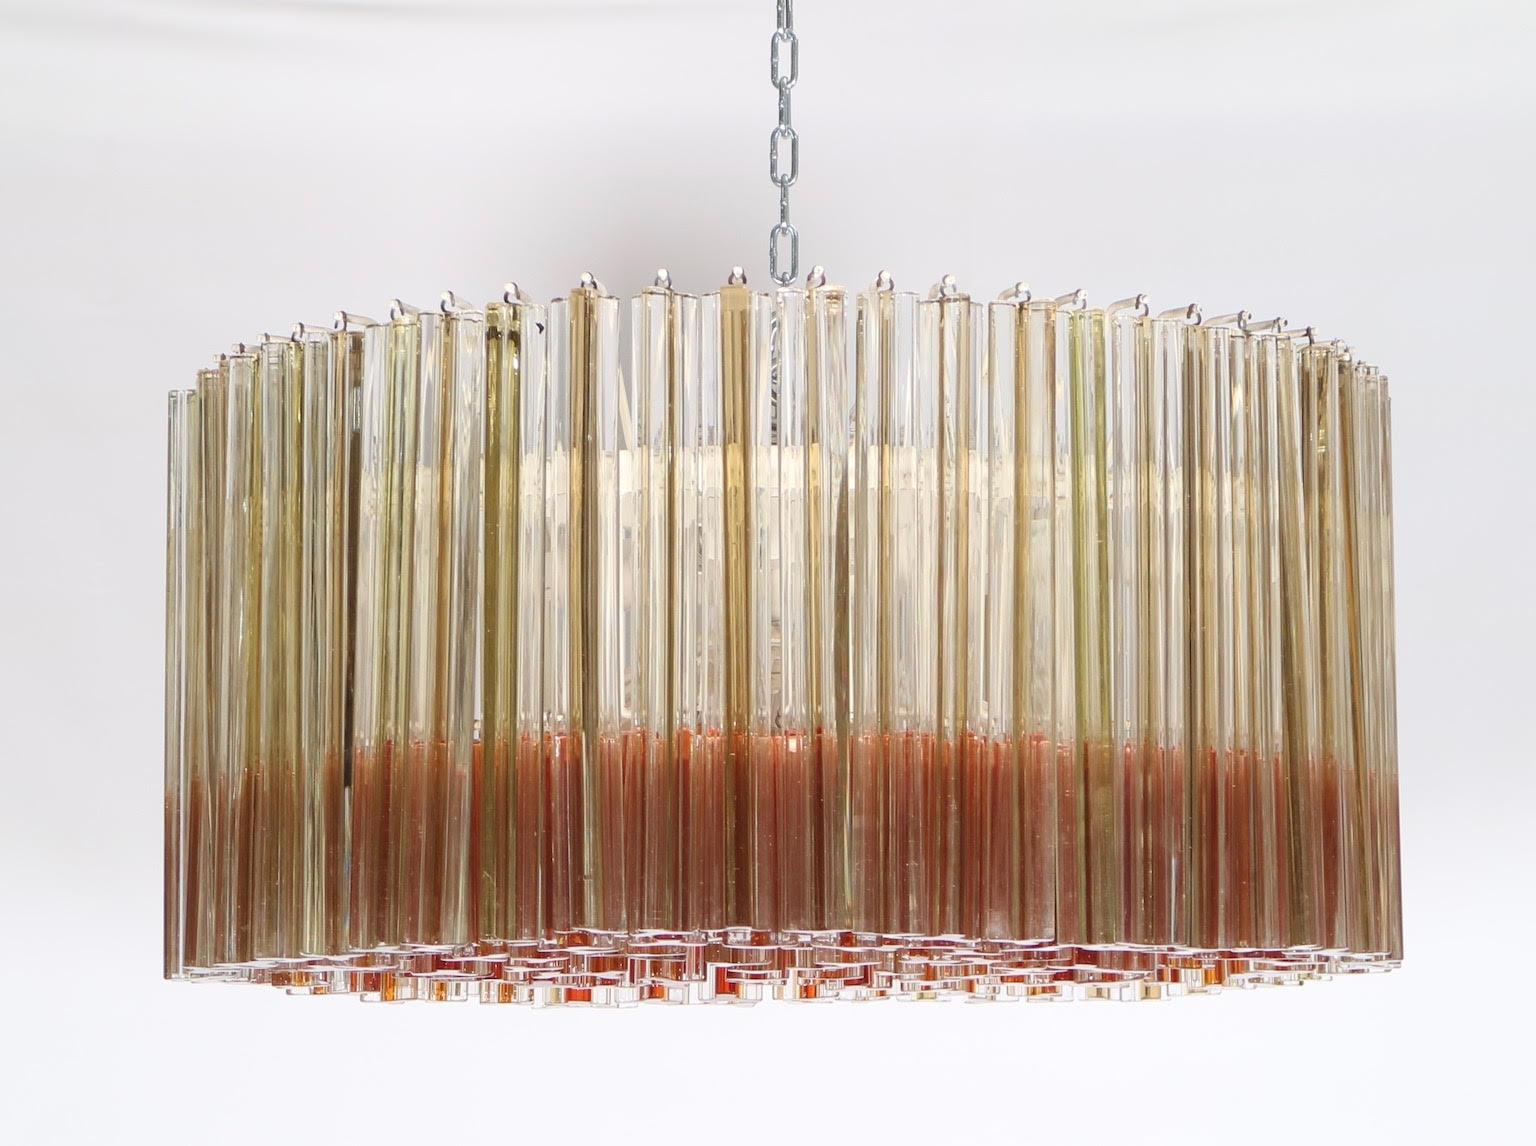 Hollywood Regency Venini Chandelier with Sommerso Trilobo Glass Rods 1